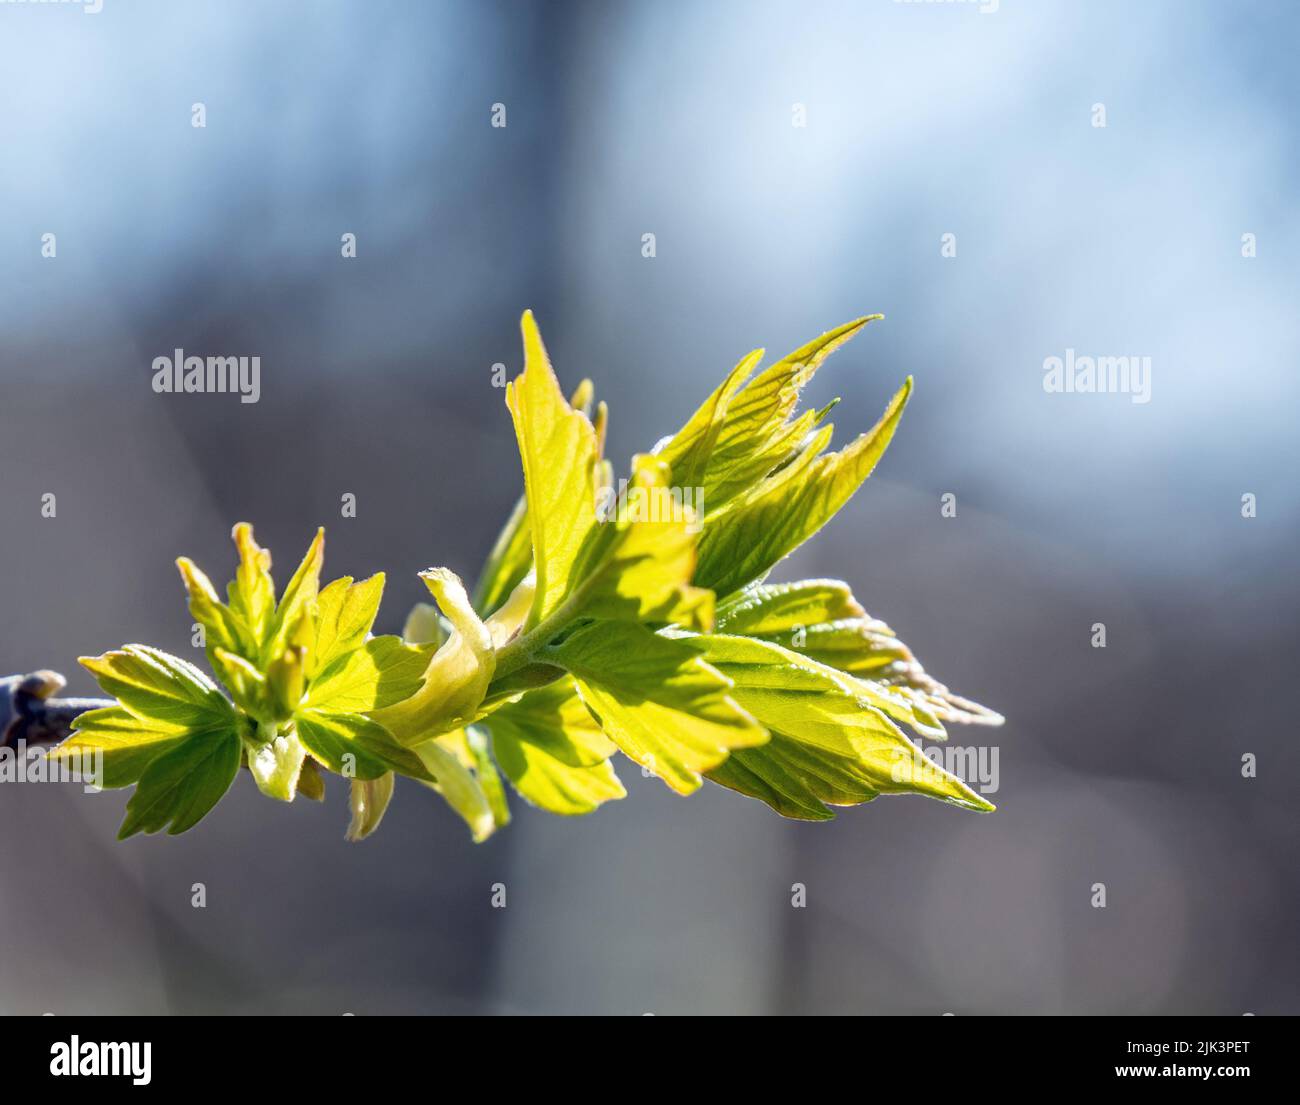 Close-up of the new spring leaves on a box elder maple tree that is growing at the edge of a forest on a bright sunny day in May. Stock Photo